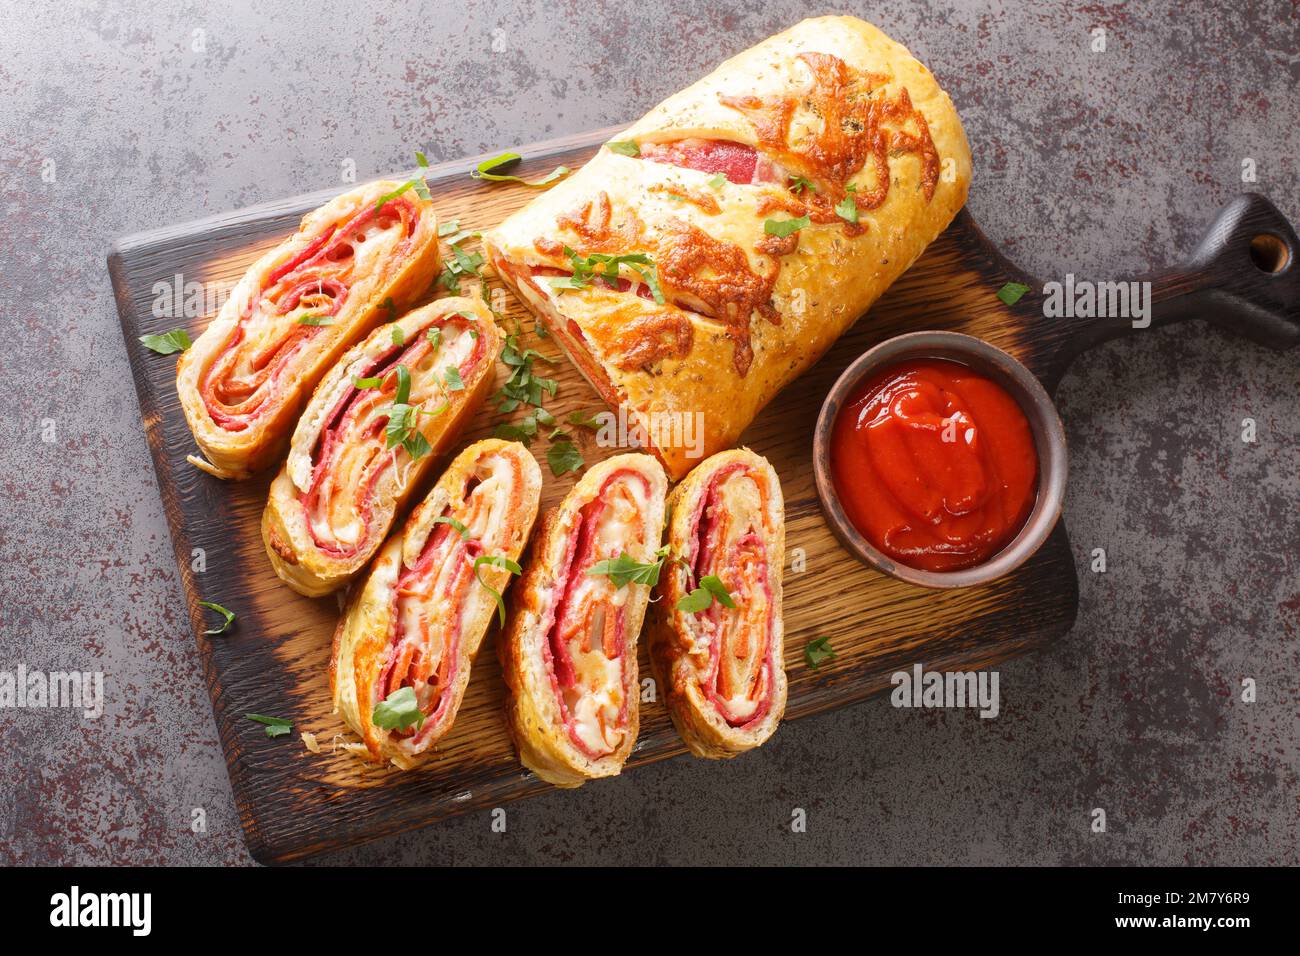 Delicious pizza stromboli roll stuffed with salami sausage and mozzarella cheese close-up on a wooden board on the table. horizontal top view from abo Stock Photo